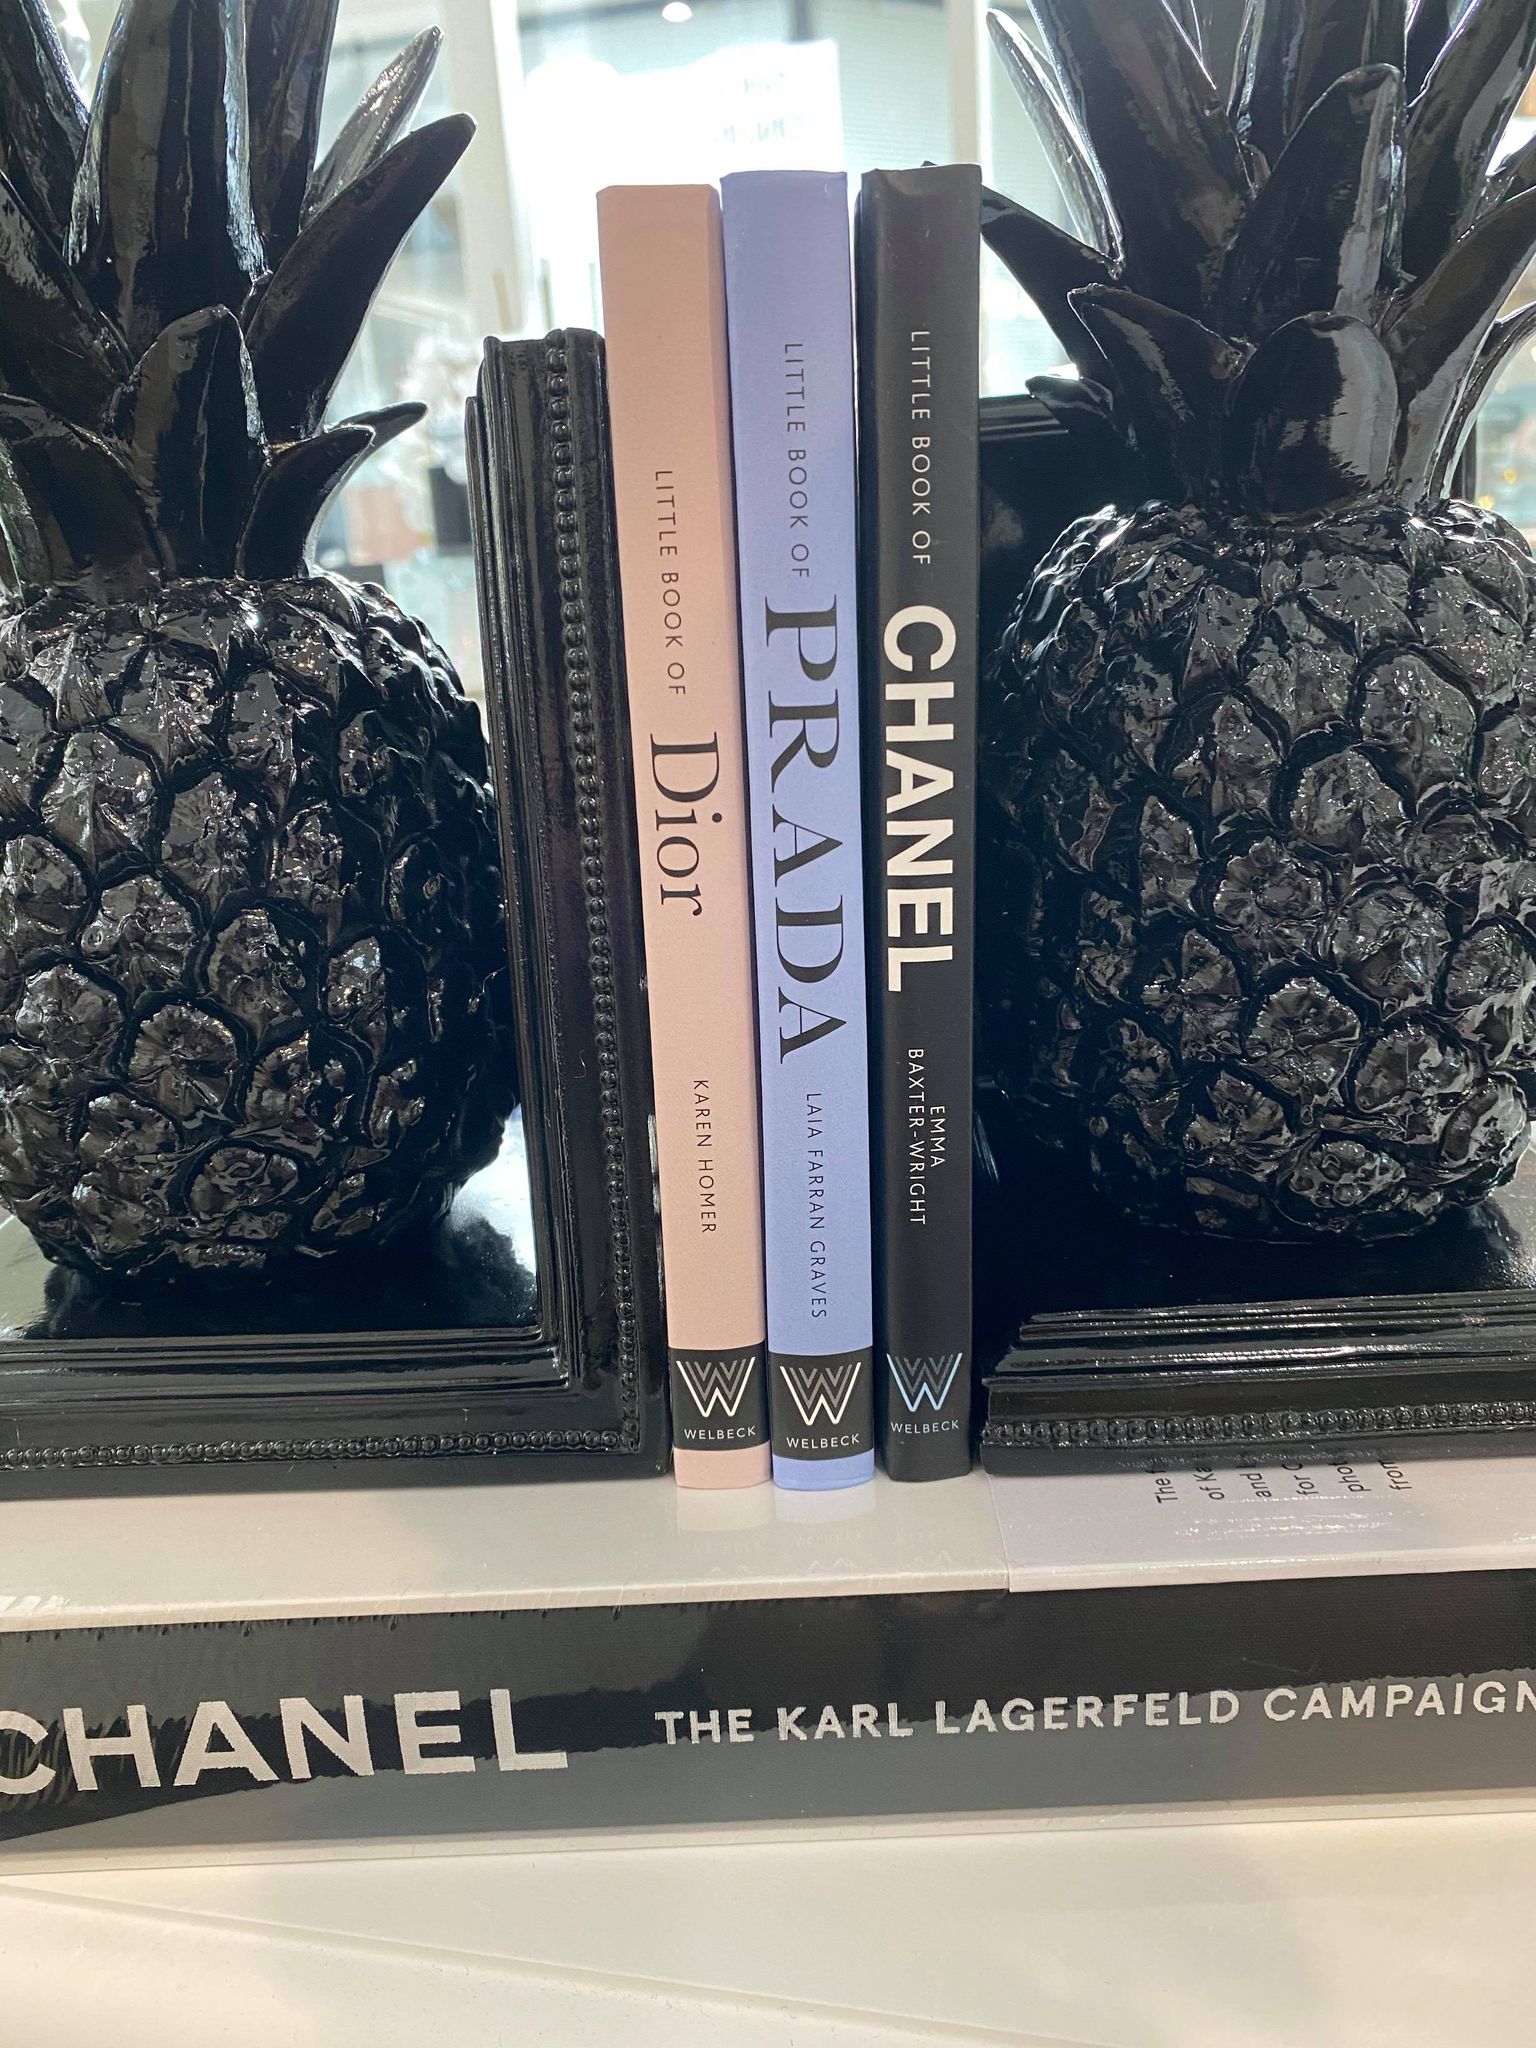 Shop the Little Book of Chanel Leather Bound Edition at Weston Table